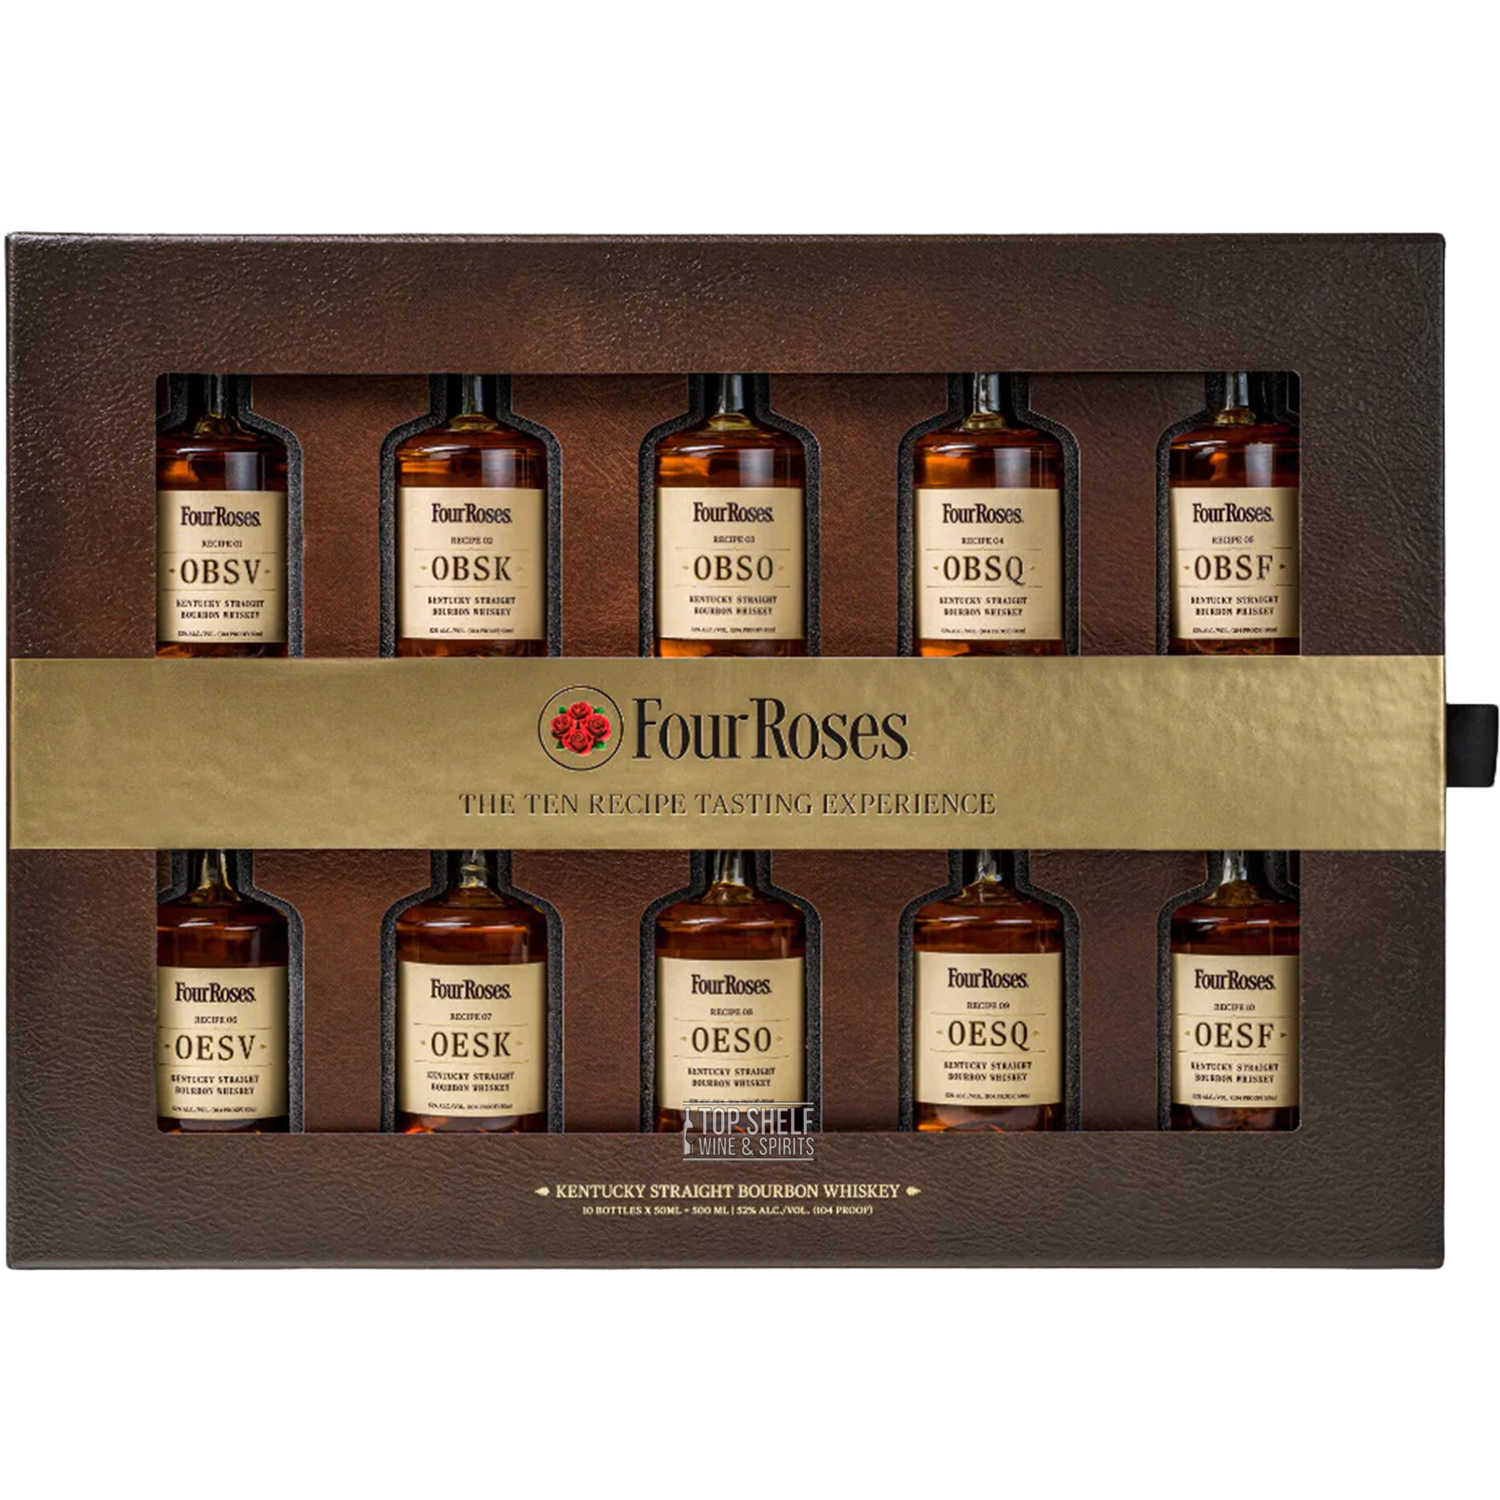 Four Roses 'The Ten' Recipe Tasting Experience